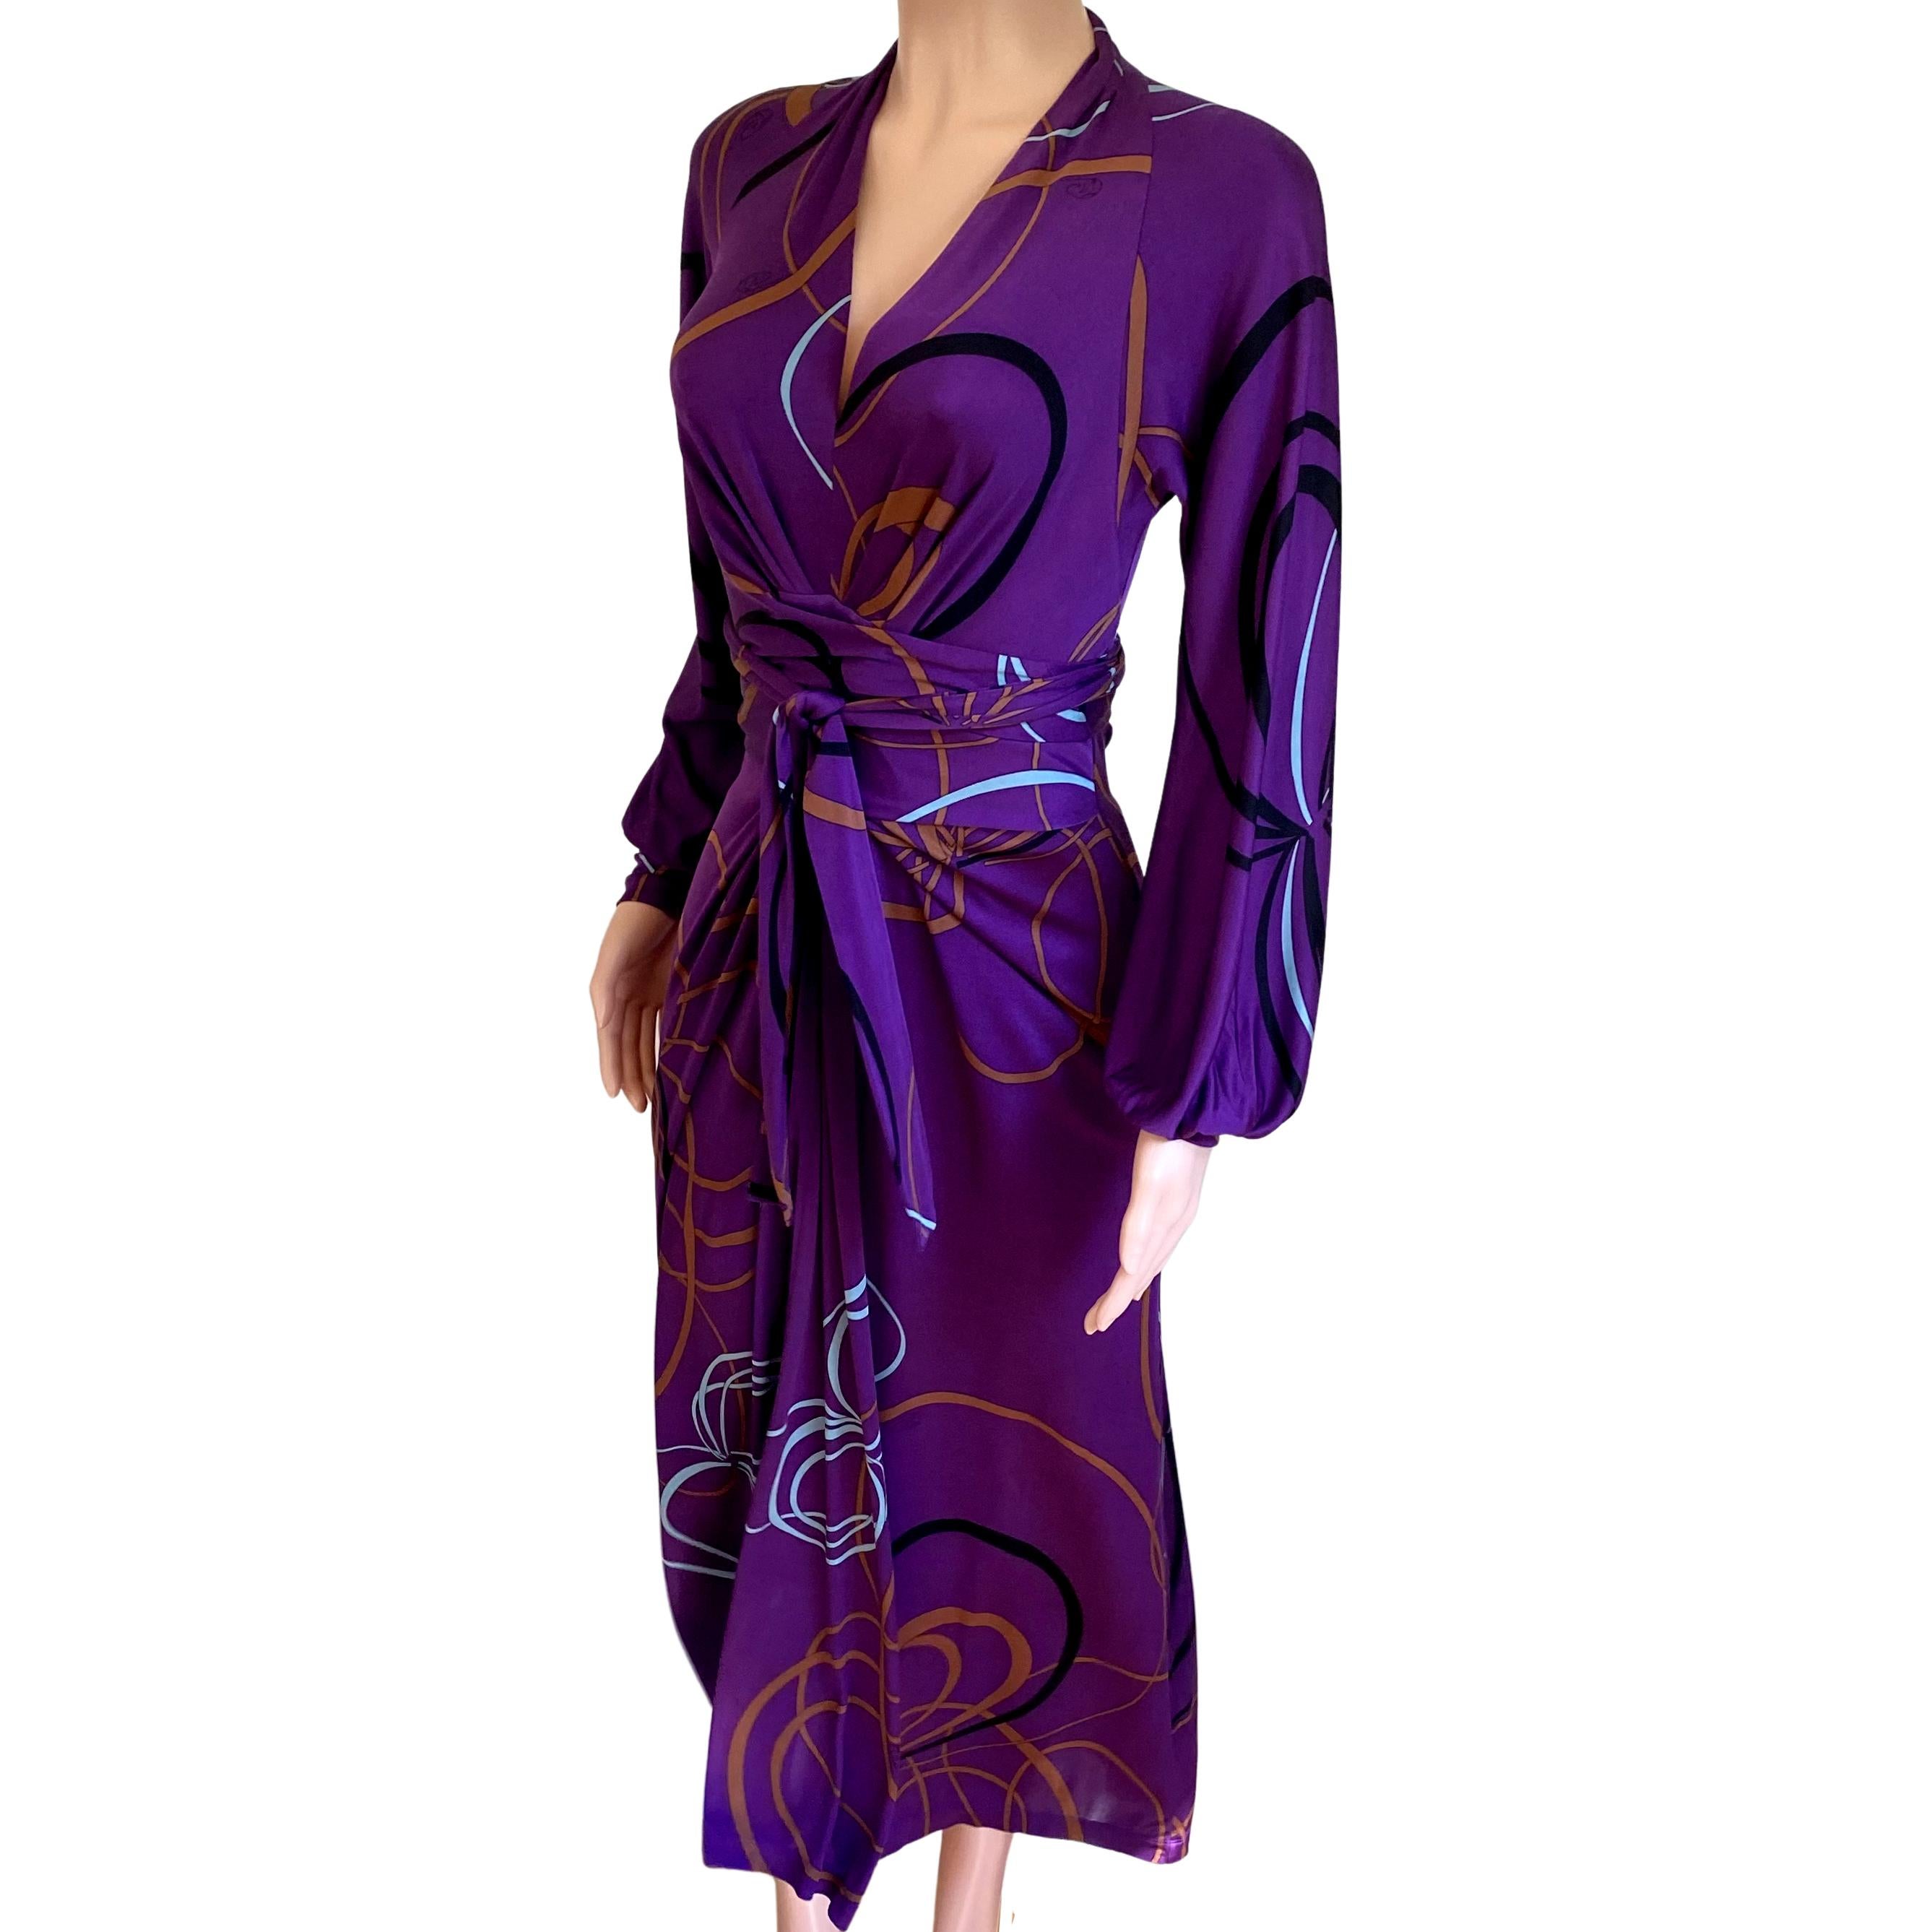 Flattering, adjustable fit with wrap-around sash, plunge V neck and billowy sleeves.
Midi length - 55